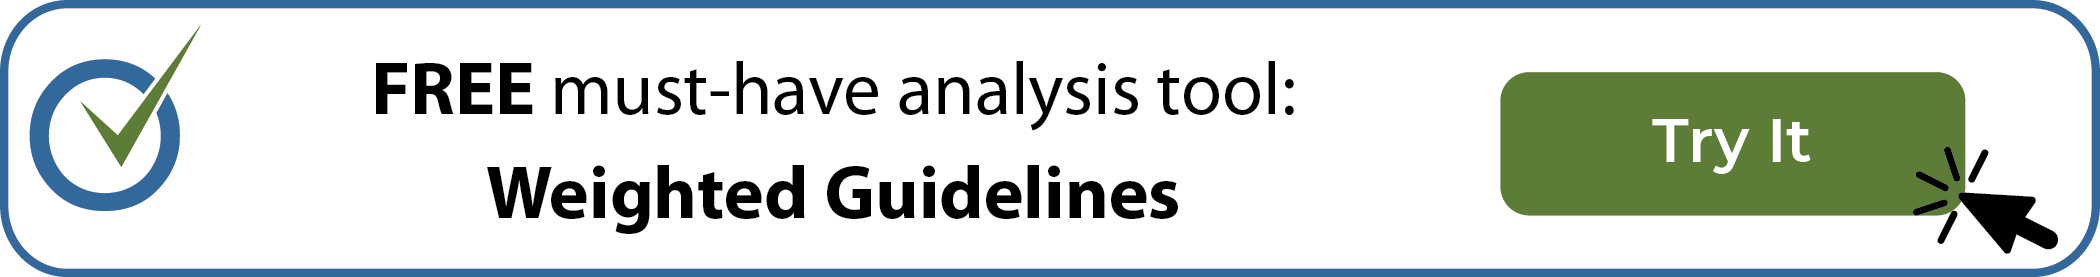 weighted guidelines tool